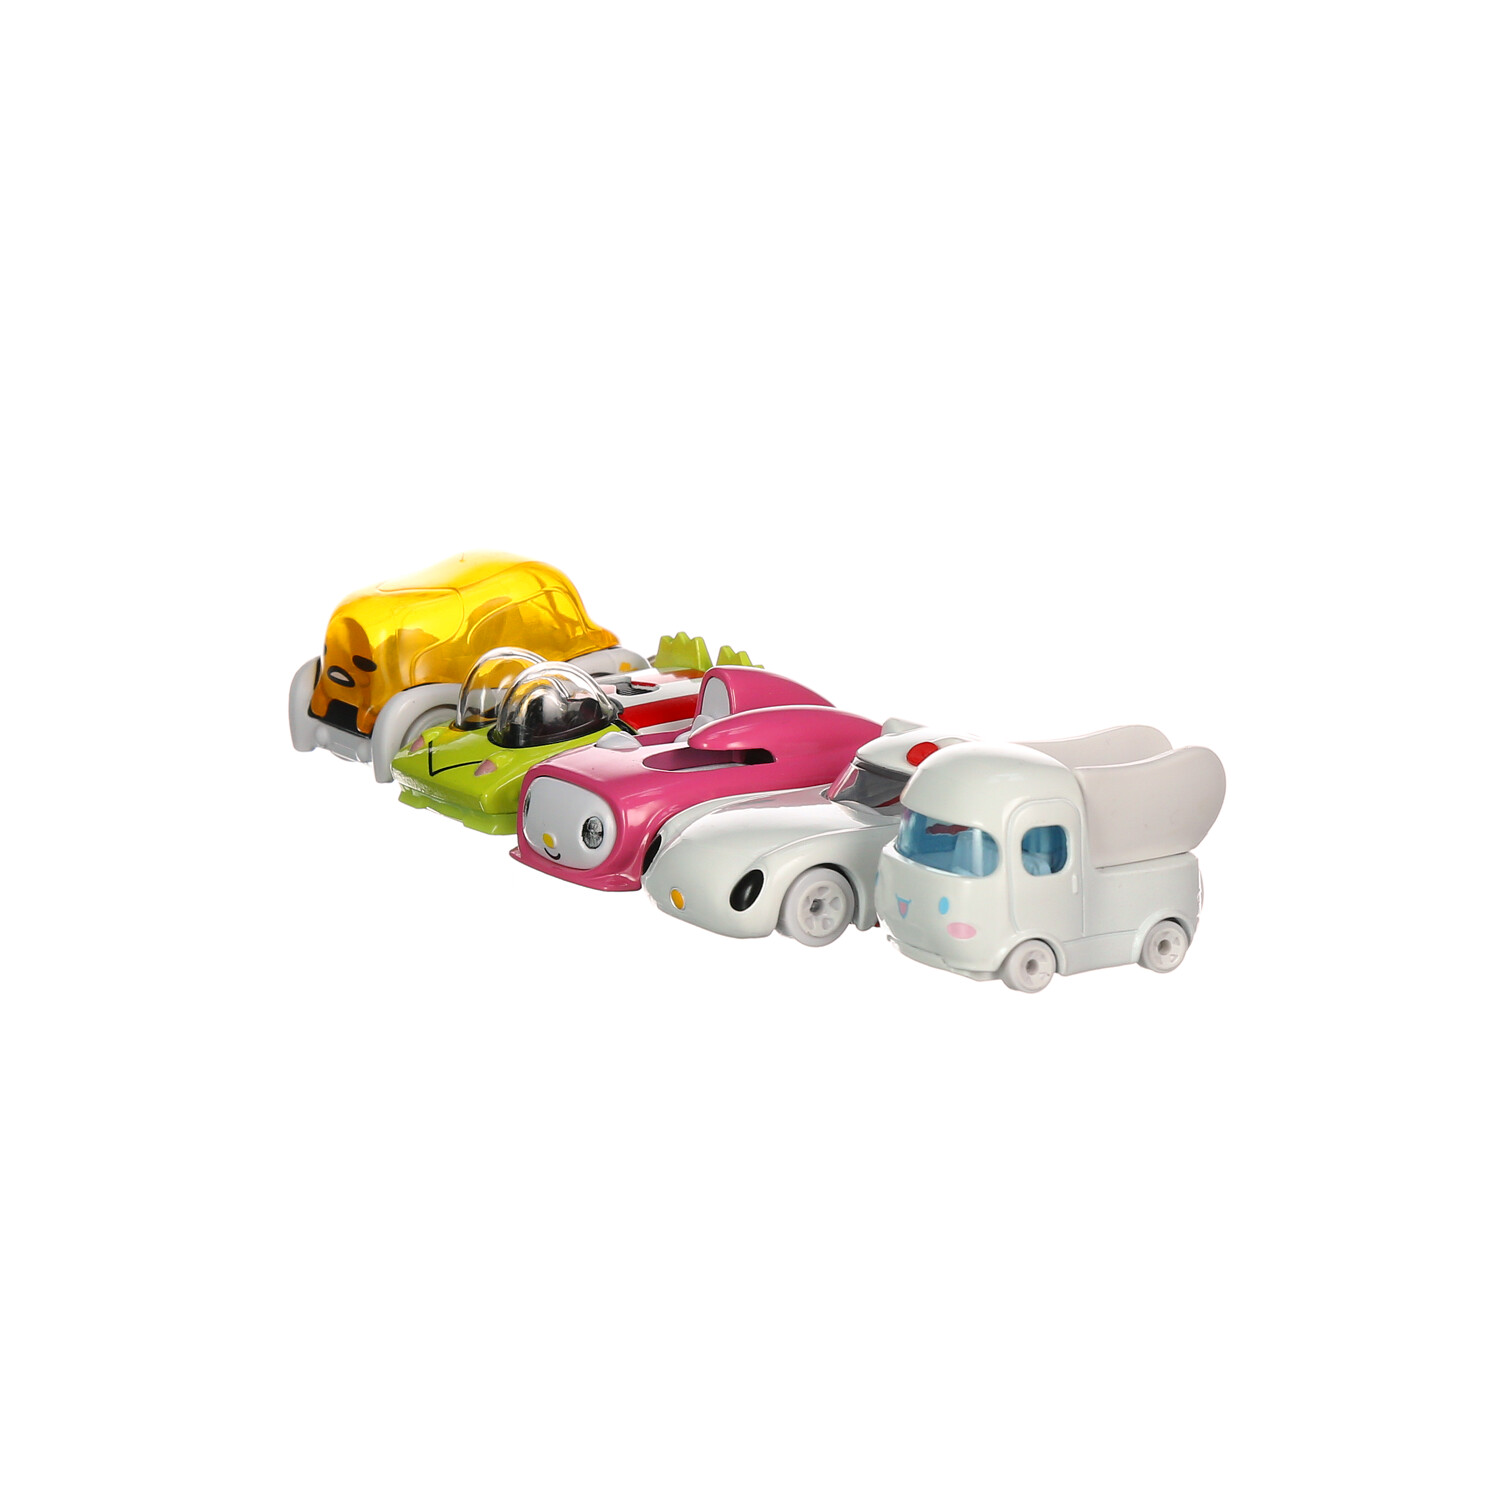 Hot Wheels Sanrio Set of 5 Character Toy Cars, Collectible